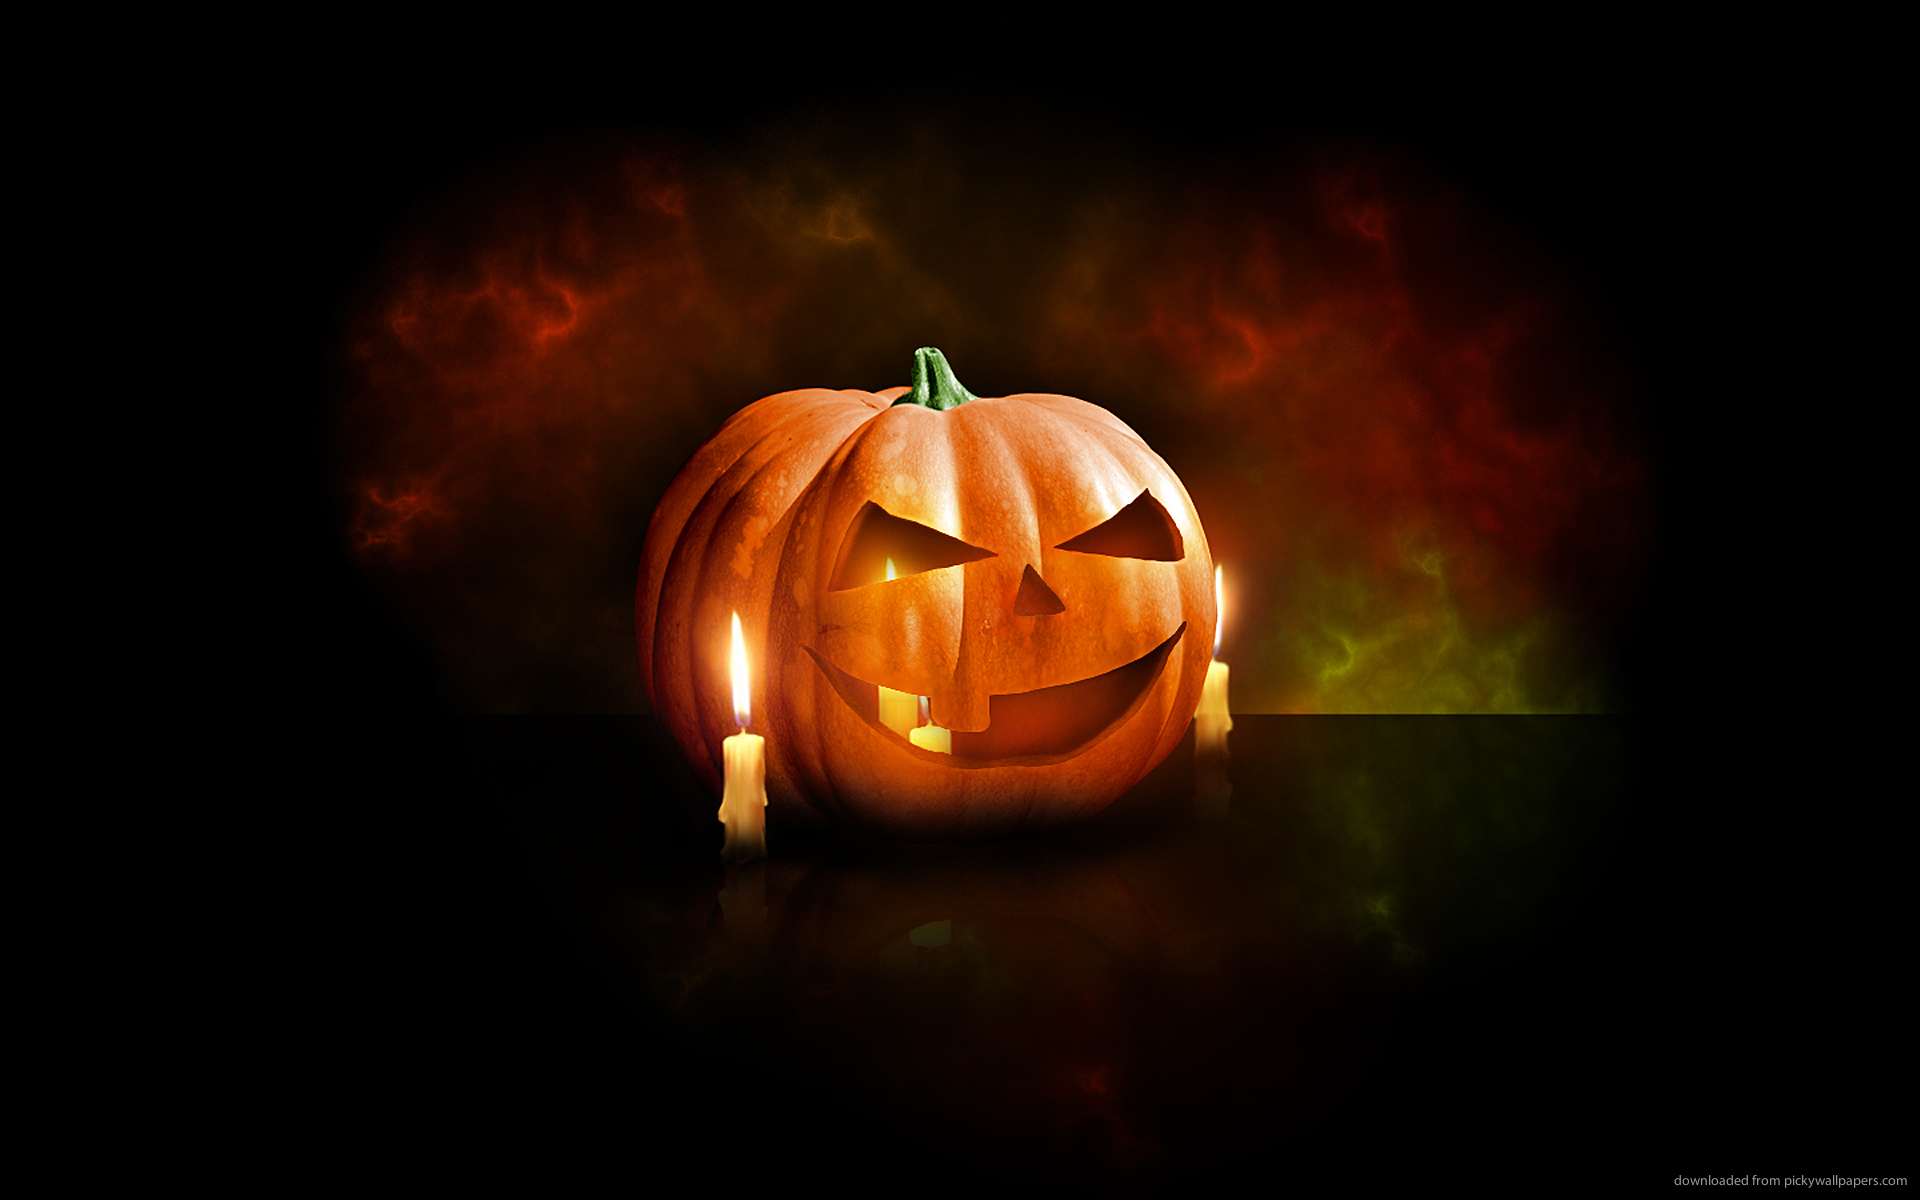 Download 1920x1200 Jack o Lantern With Candles Wallpaper